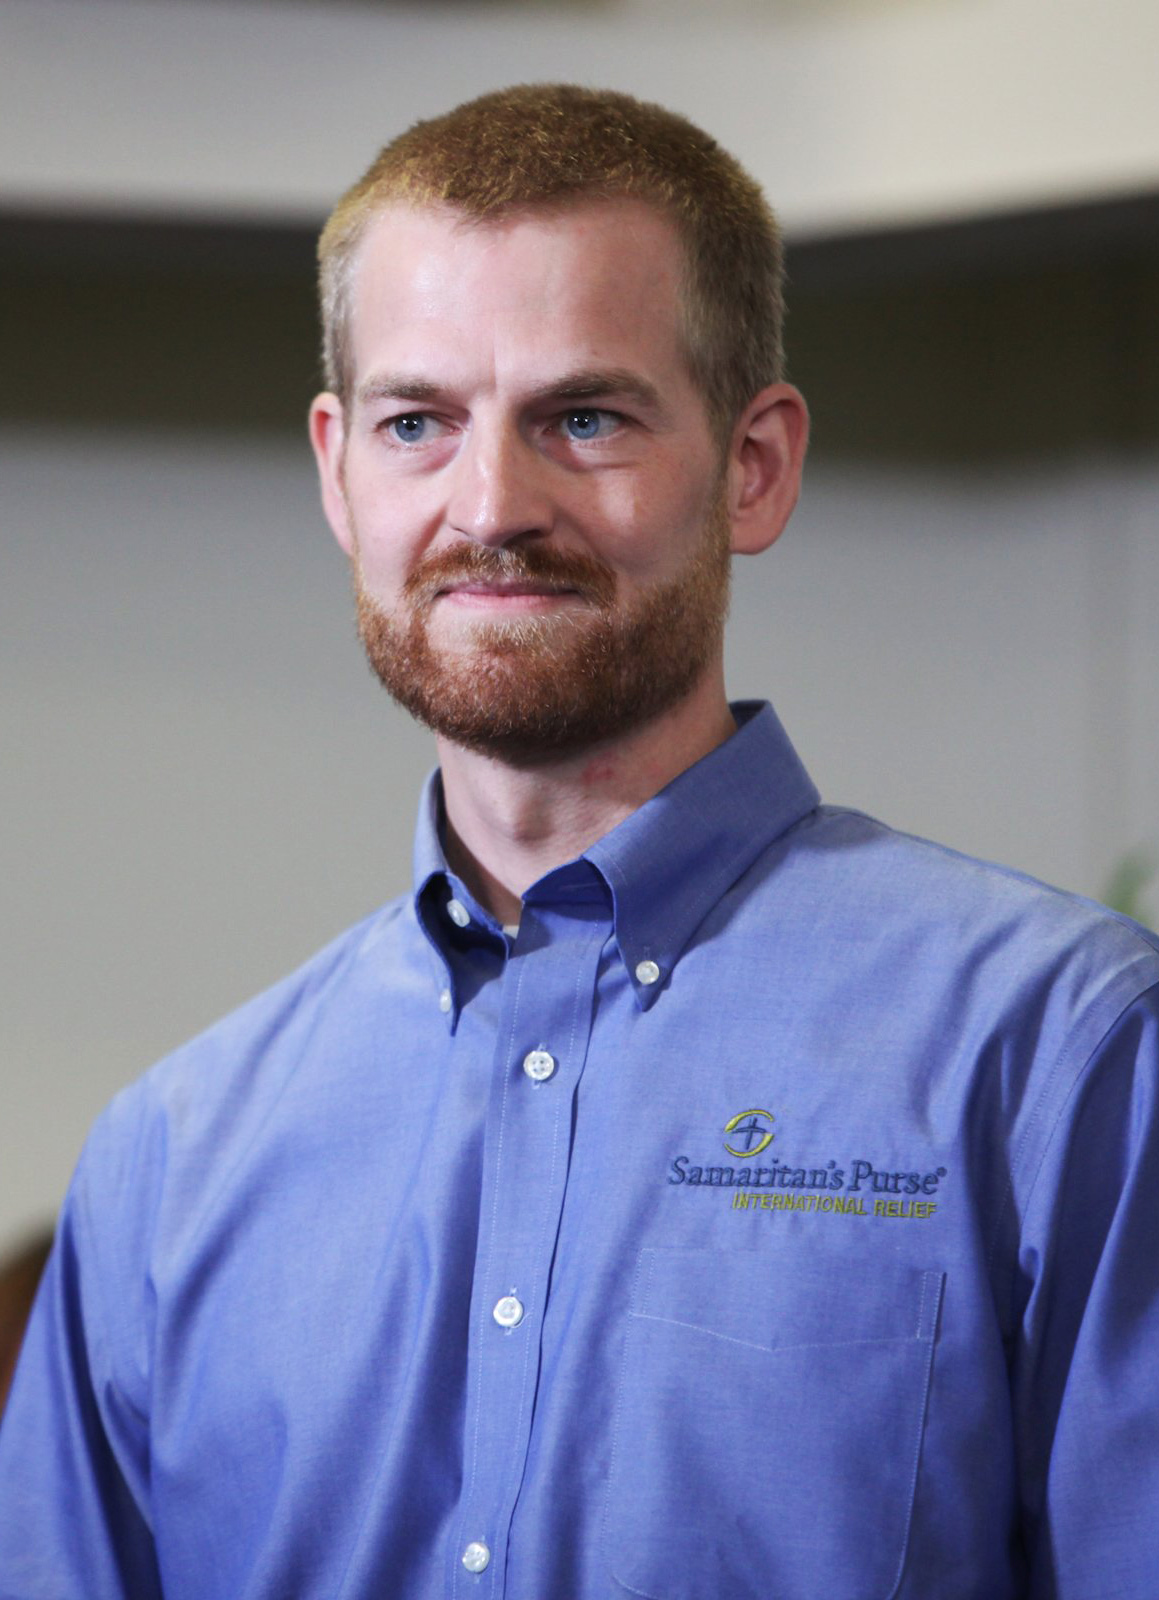 Dr. Kent Brantly an Ebola patient at Emory Hospital during a press conference announcing his release from the hospital on Aug. 21, 2014 in Atlanta. (Jessica McGowan—Getty Images)